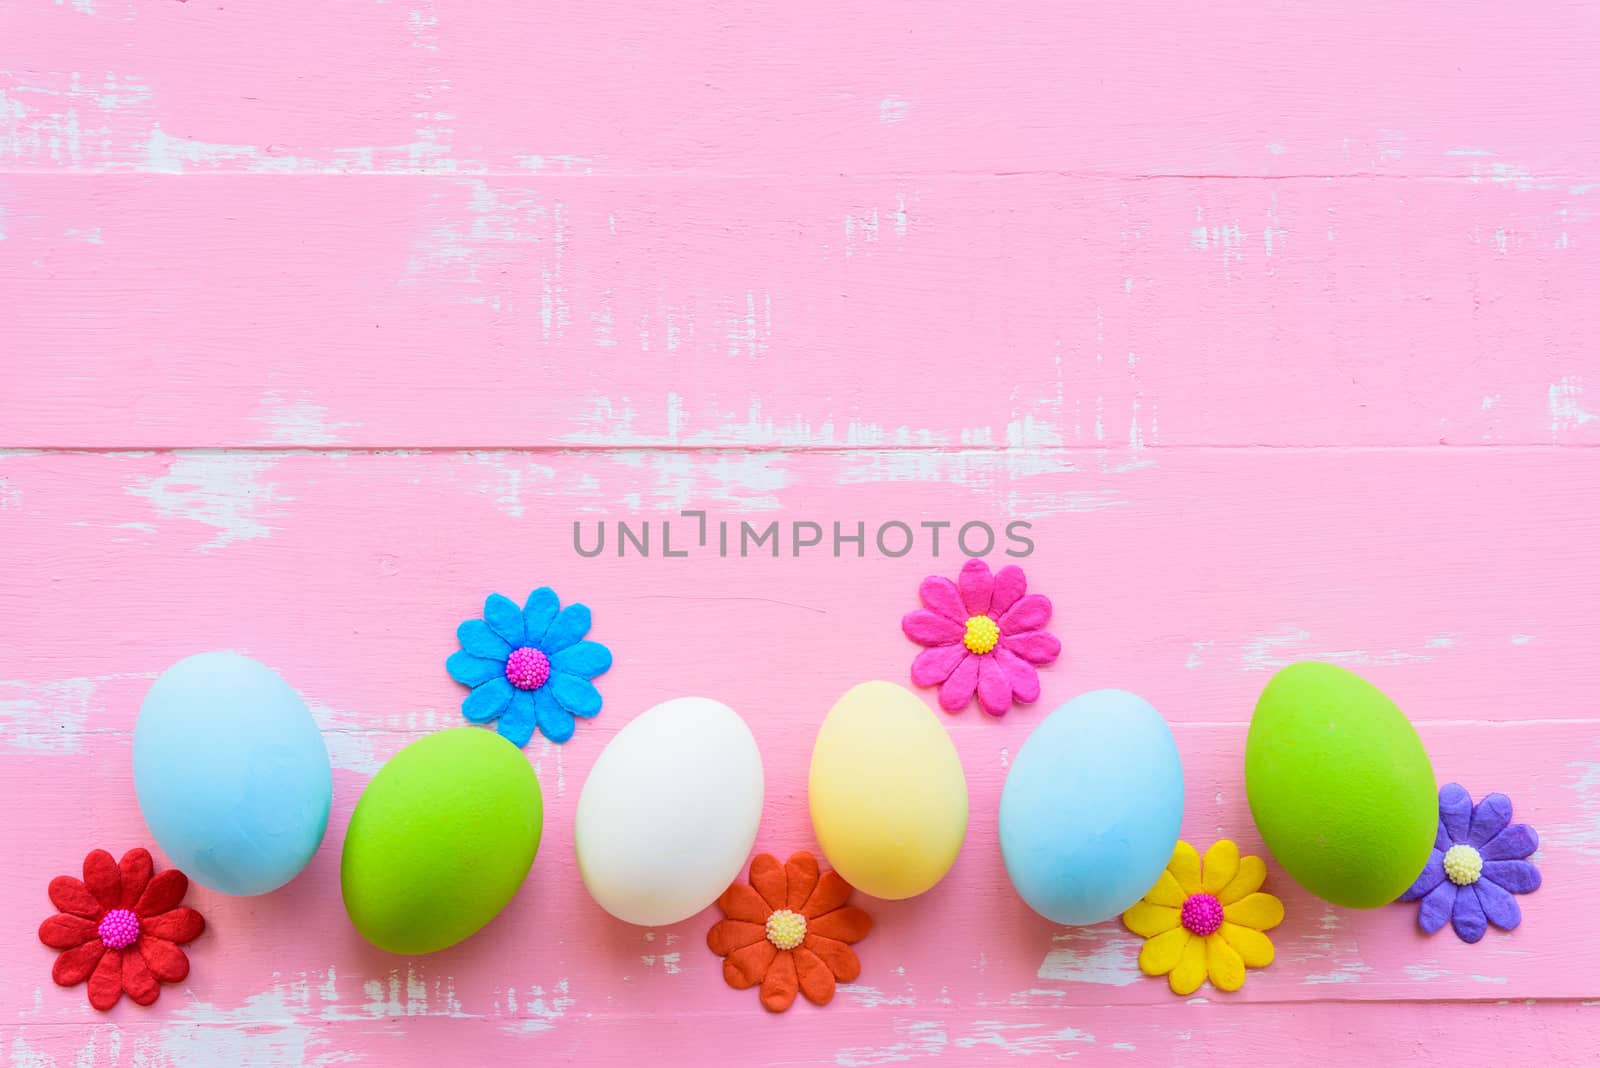 Row Easter eggs with colorful paper flowers on bright pink and w by spukkato